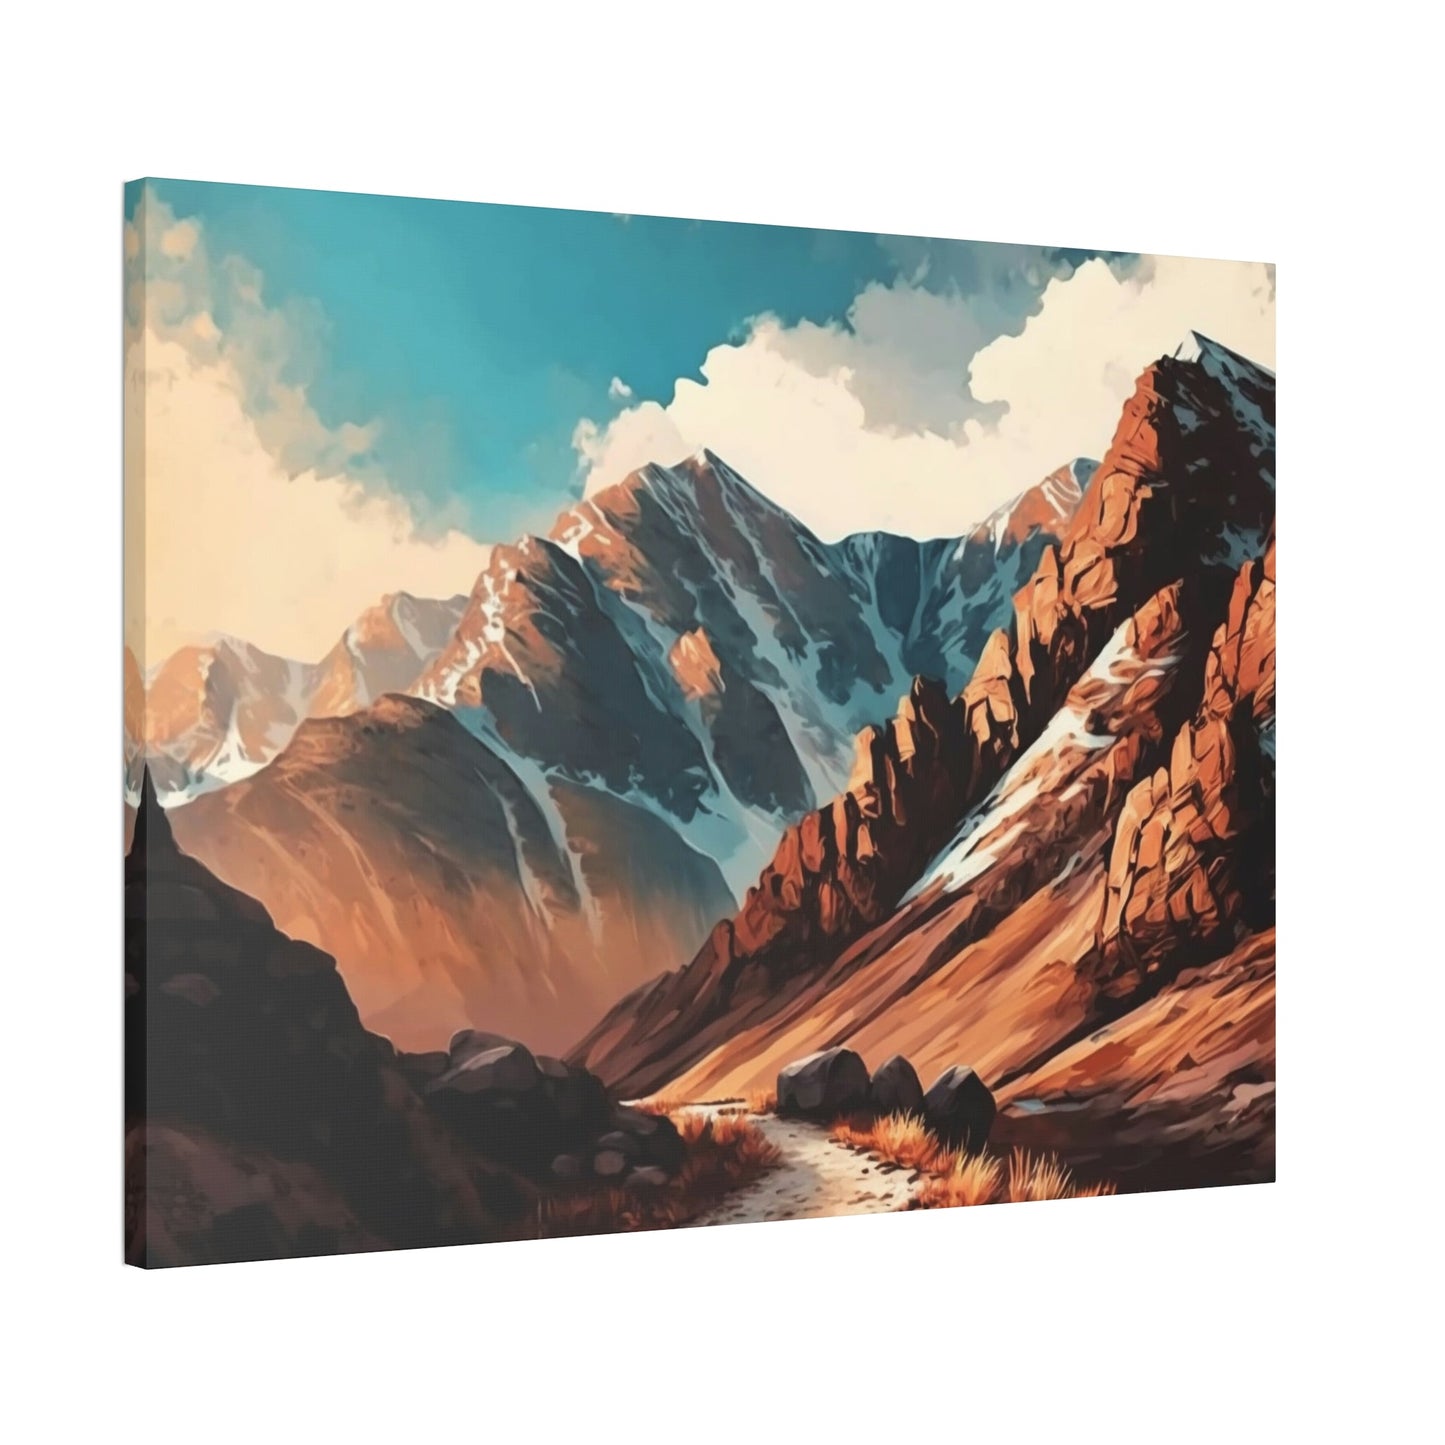 Ascending to New Heights: A Mountainous Landscape on Canvas